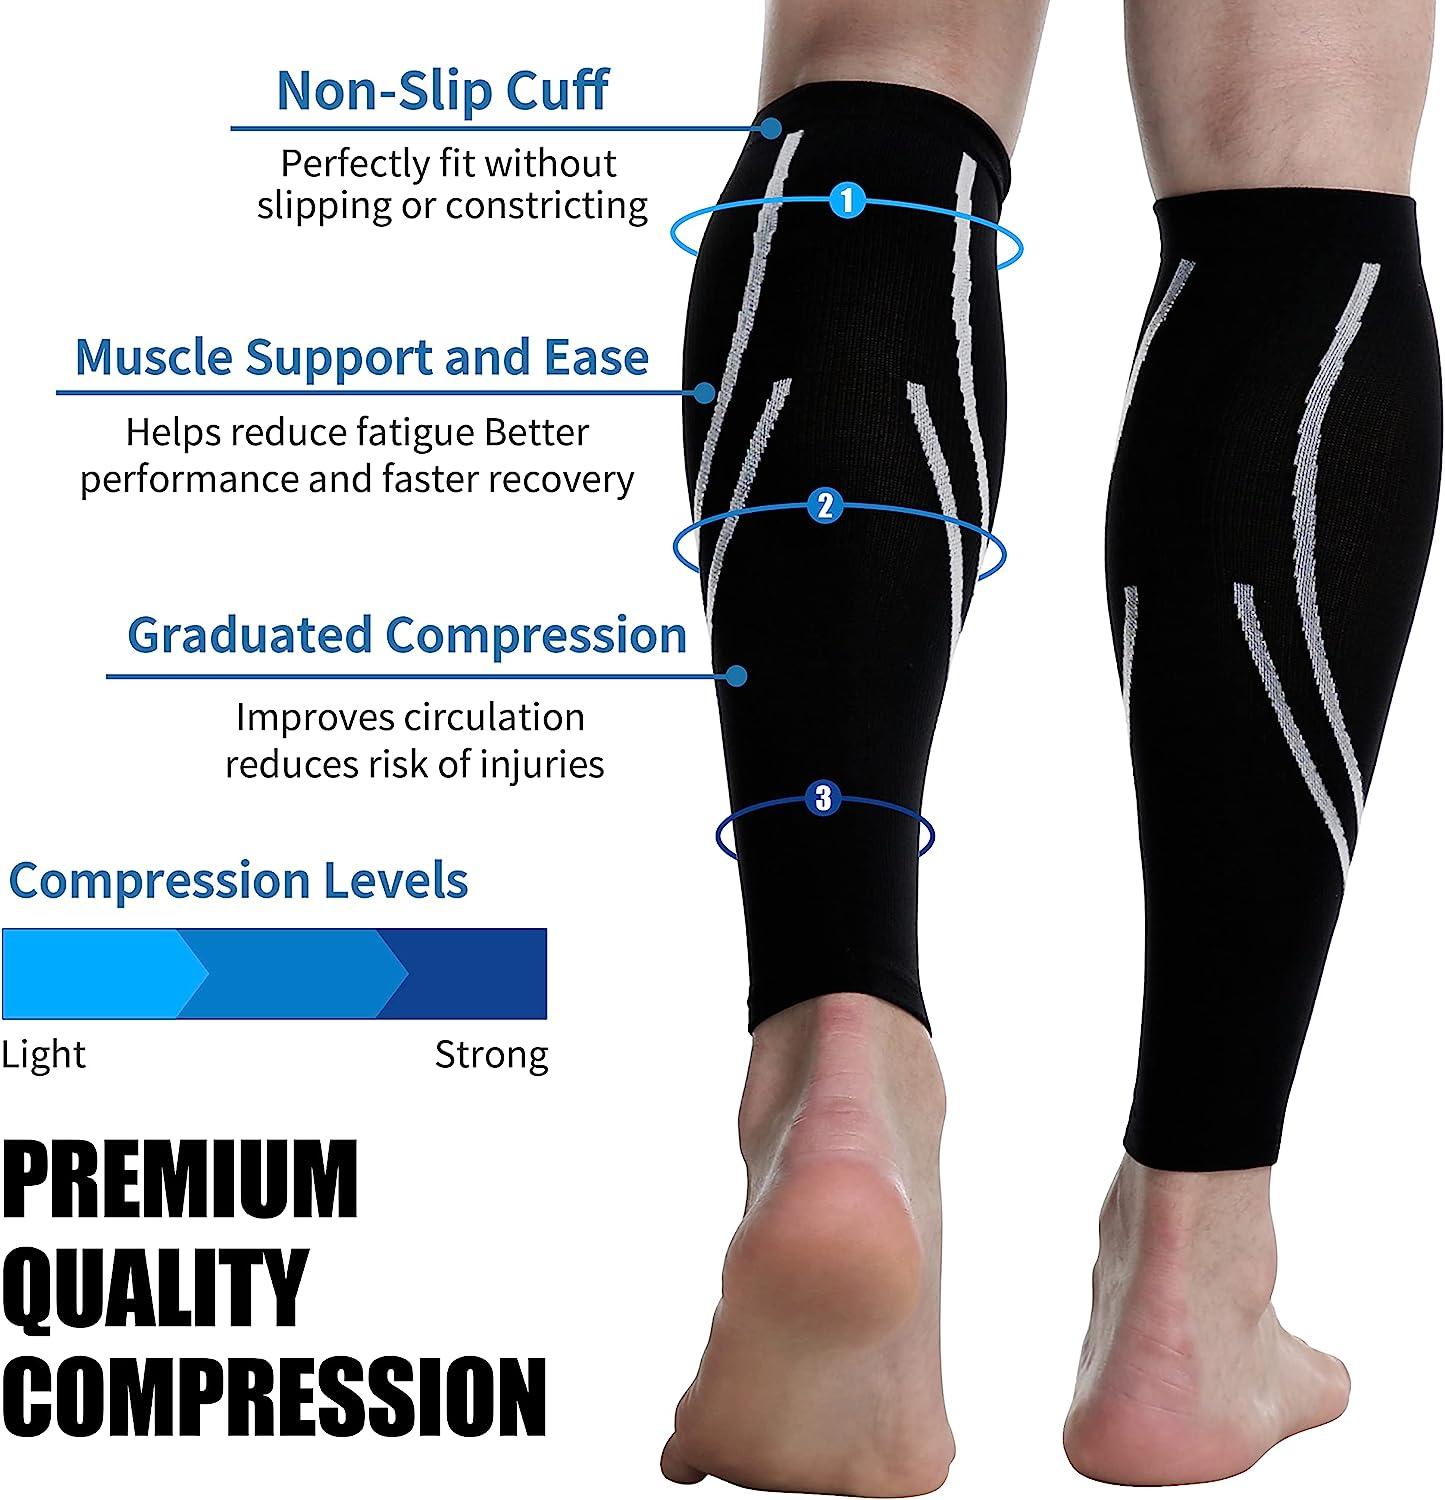 Udaily Calf Compression Sleeves for Men & Women (20-30mmhg) - Calf Support  Leg Compression Socks for Shin Splint & Calf Pain Relief M(Calf 12.5-15)  2 Pairs (Black,pink)